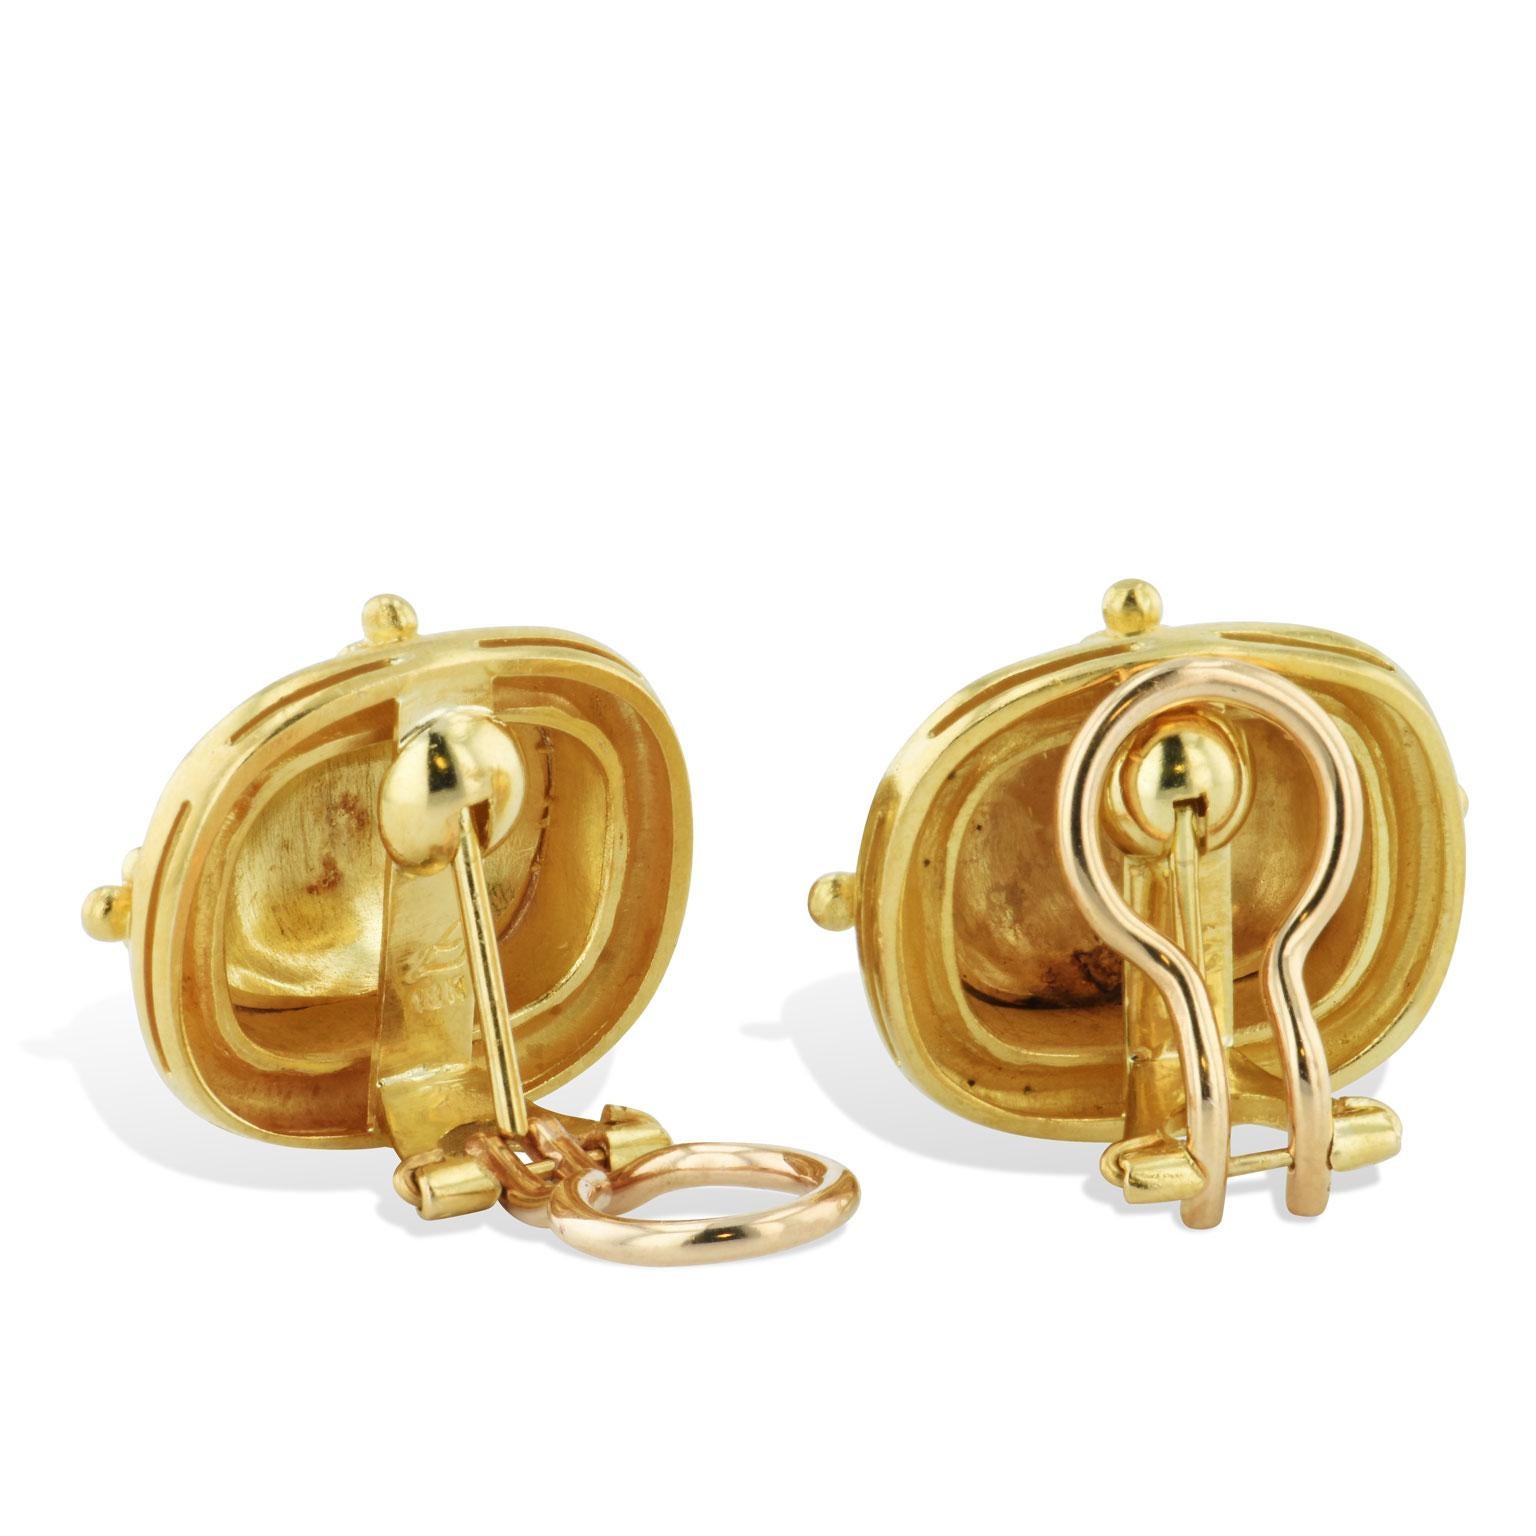 Make a buzz with these previously loved Elizabeth Locke 18 karat yellow gold “Bee” clip and post earrings. This pair is absolutely stunning (Retail $5,000).